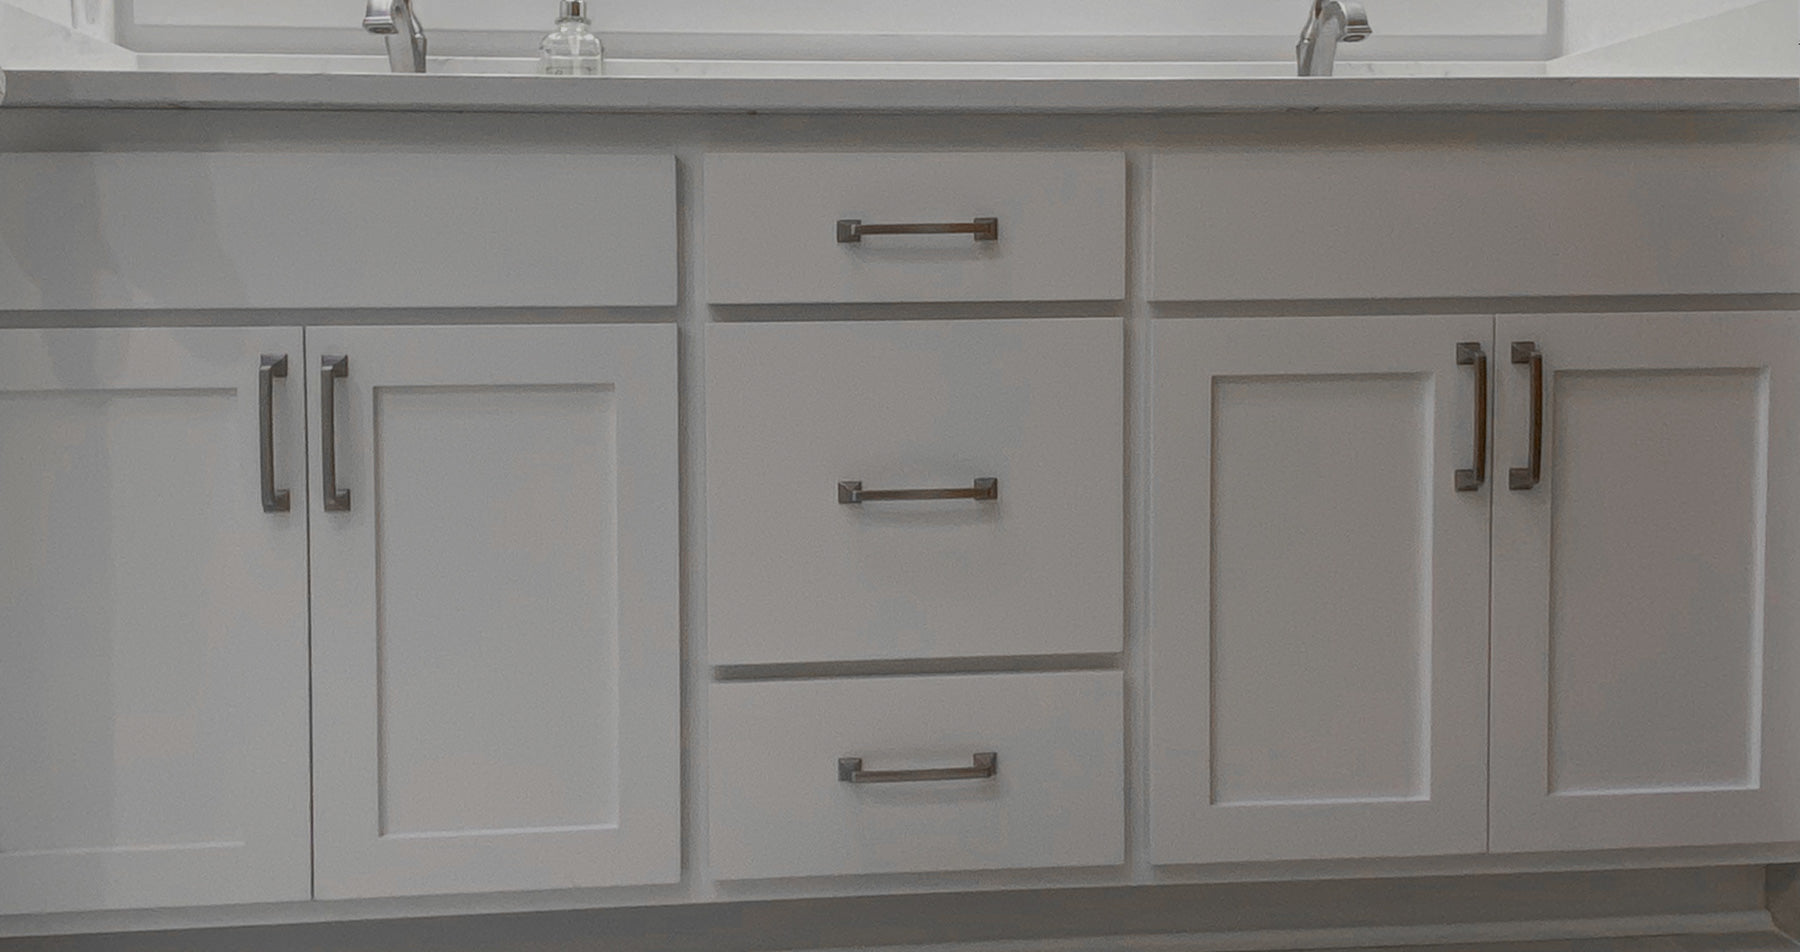 Q: Can I add Docking Drawer to a 12” Wide Drawer?